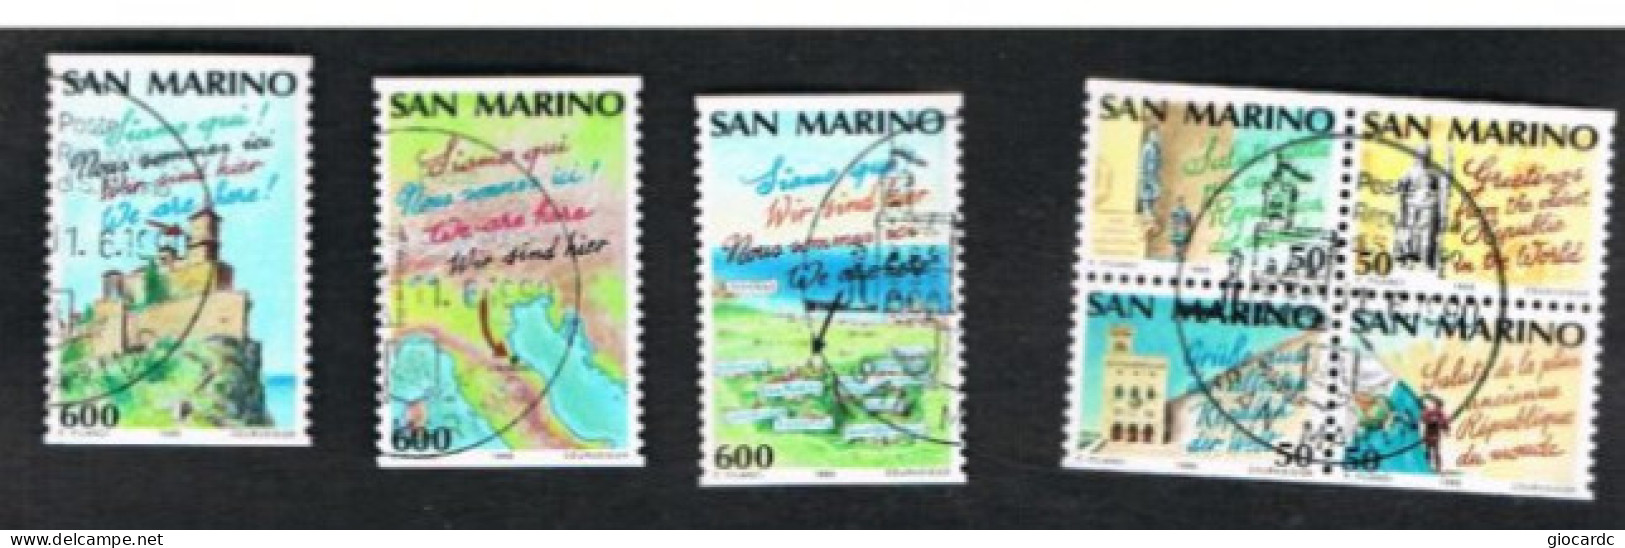 SAN MARINO UN 1289.1295  - 1990 ANNO DEL TURISMO (COMPLET SET OF 7 STAMPS, 4 SE-TENANT - BY BOOKLET)  - USED - Usados